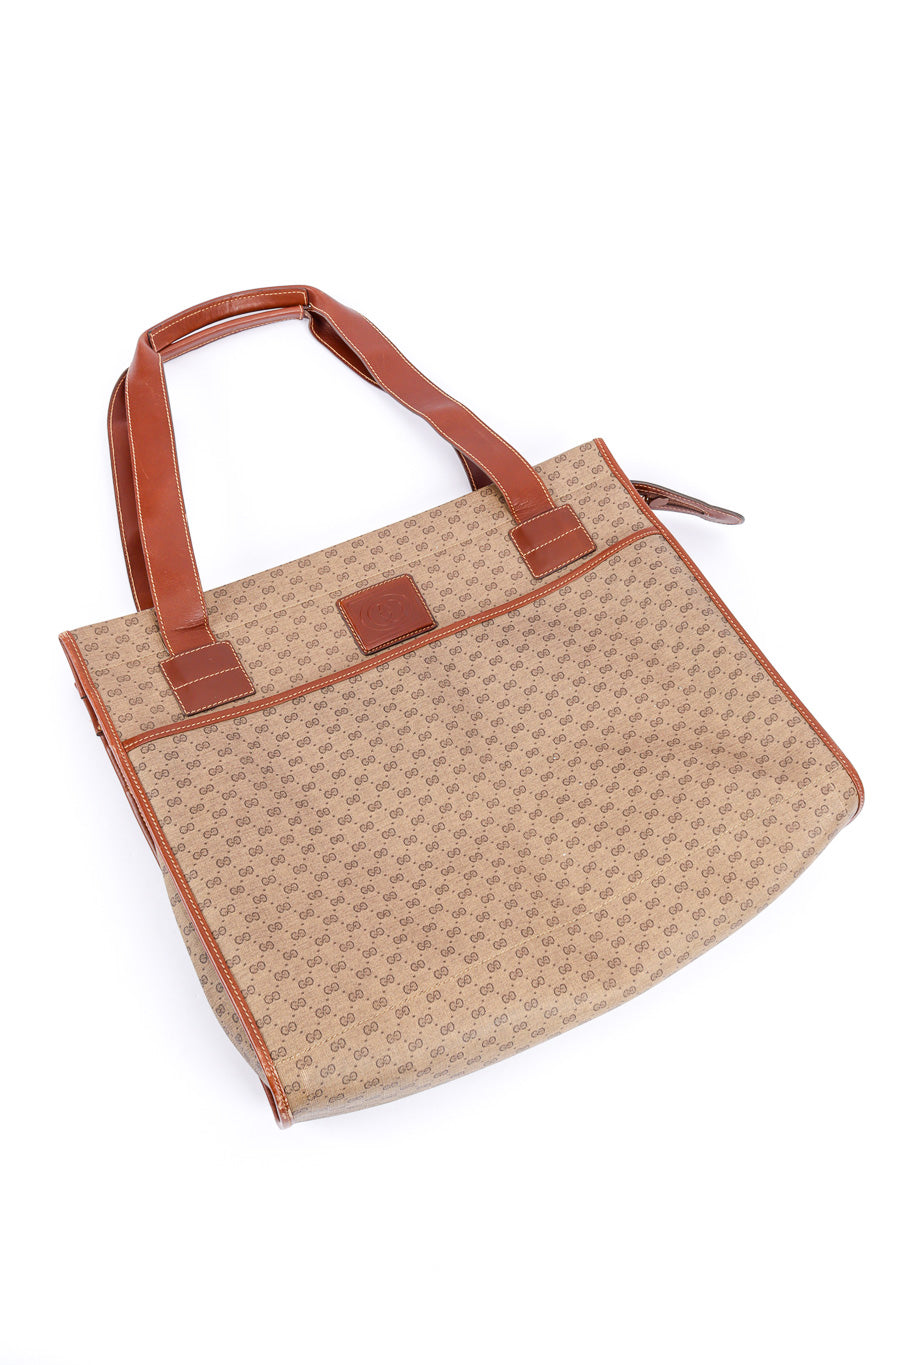 Coated Canvas & Leather GG Tote by Gucci @recessla